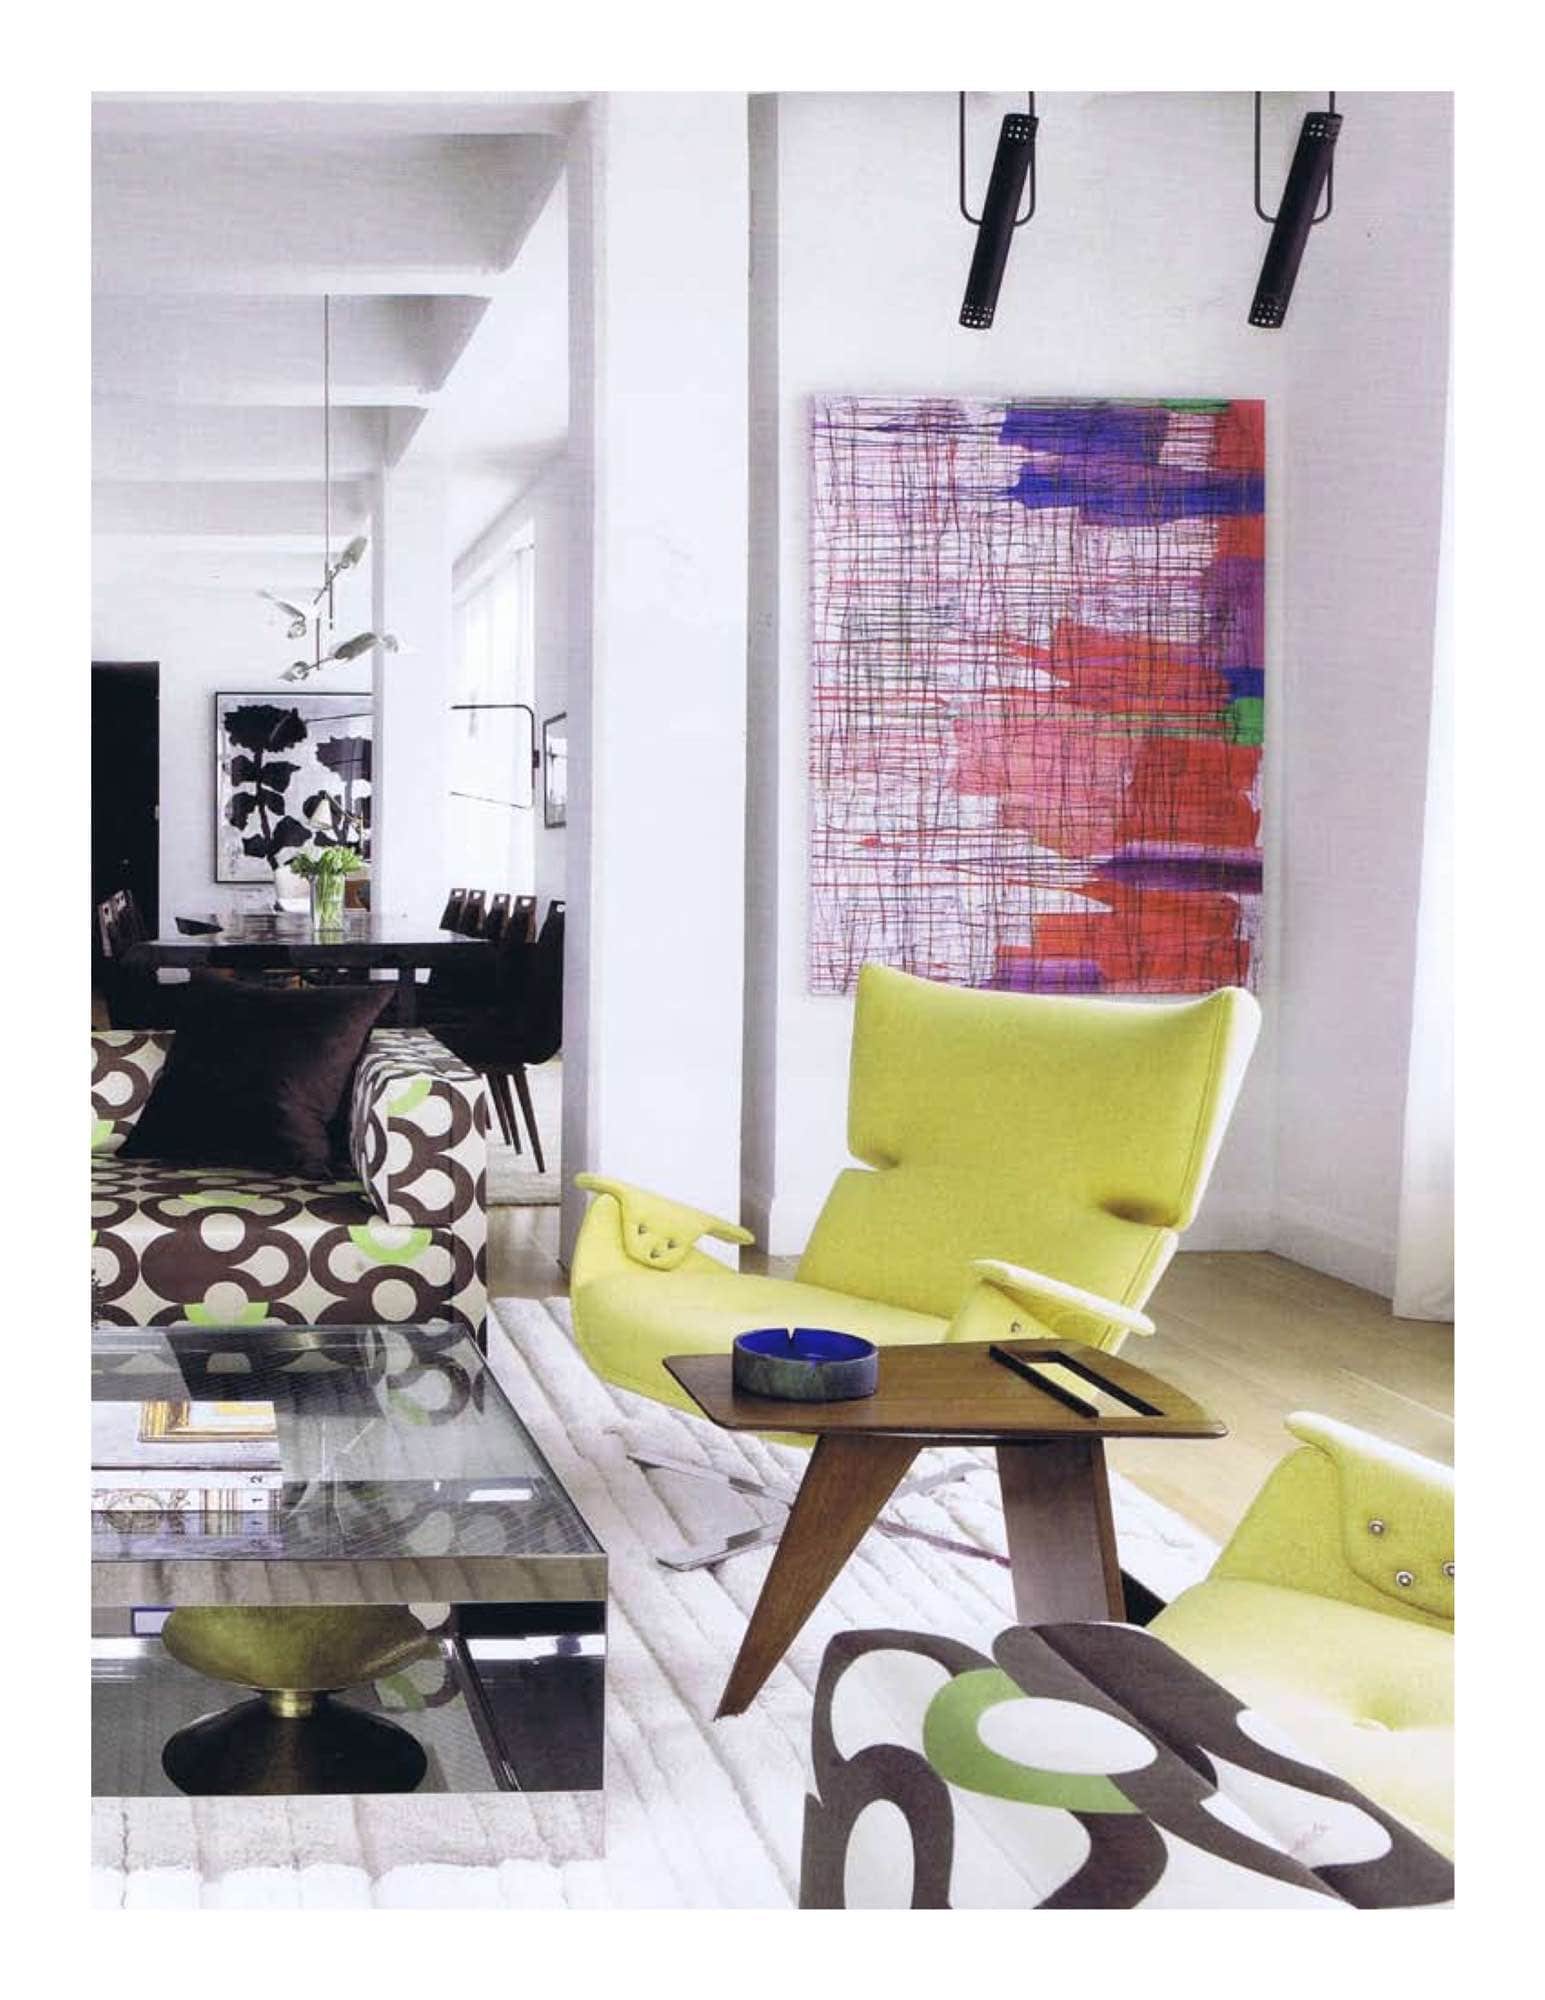 Shown in the image is a Paulistana lounge armchair by Jorge Zalszupin and abstract artwork by Ghada Armer.  Interior designed by Carol Egan.